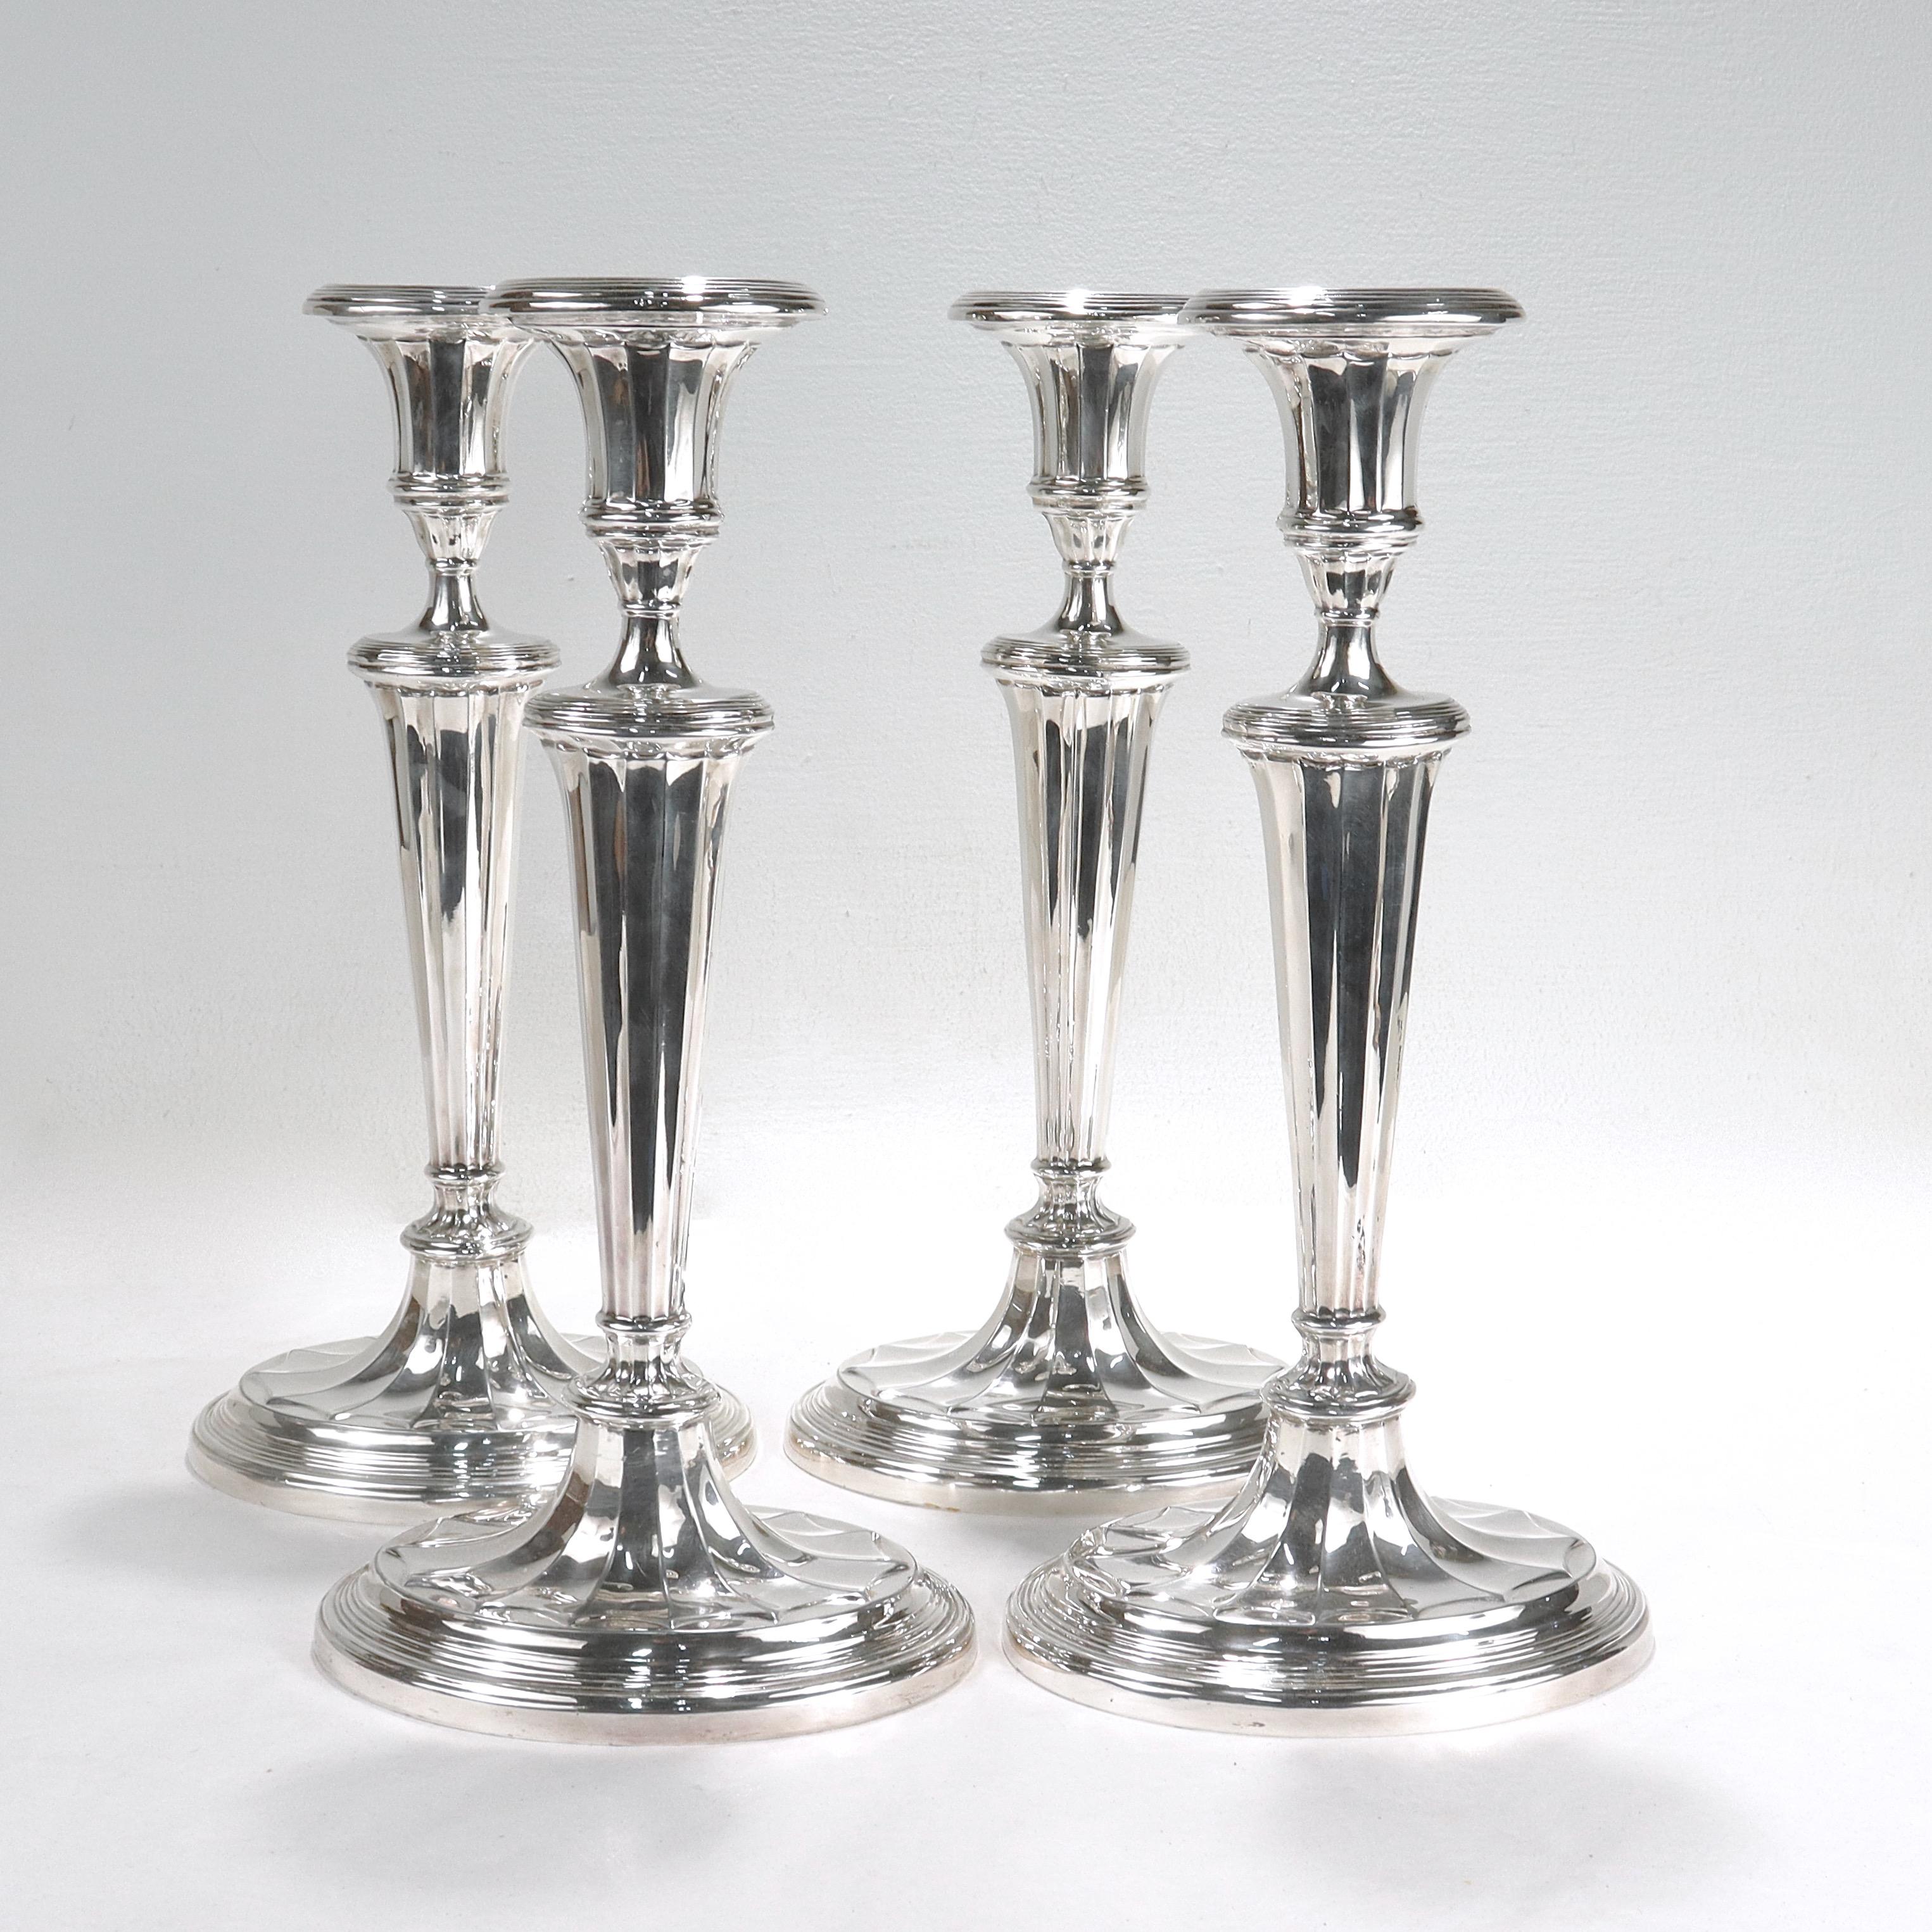 A fine set of 4 matching silver plated candlesticks.

In the Regency style. 

Having an oval form with shaped candlecups, fluted sides, and a stepped base. 

Each has a felt padded base.

Simply a wonderful set of high style